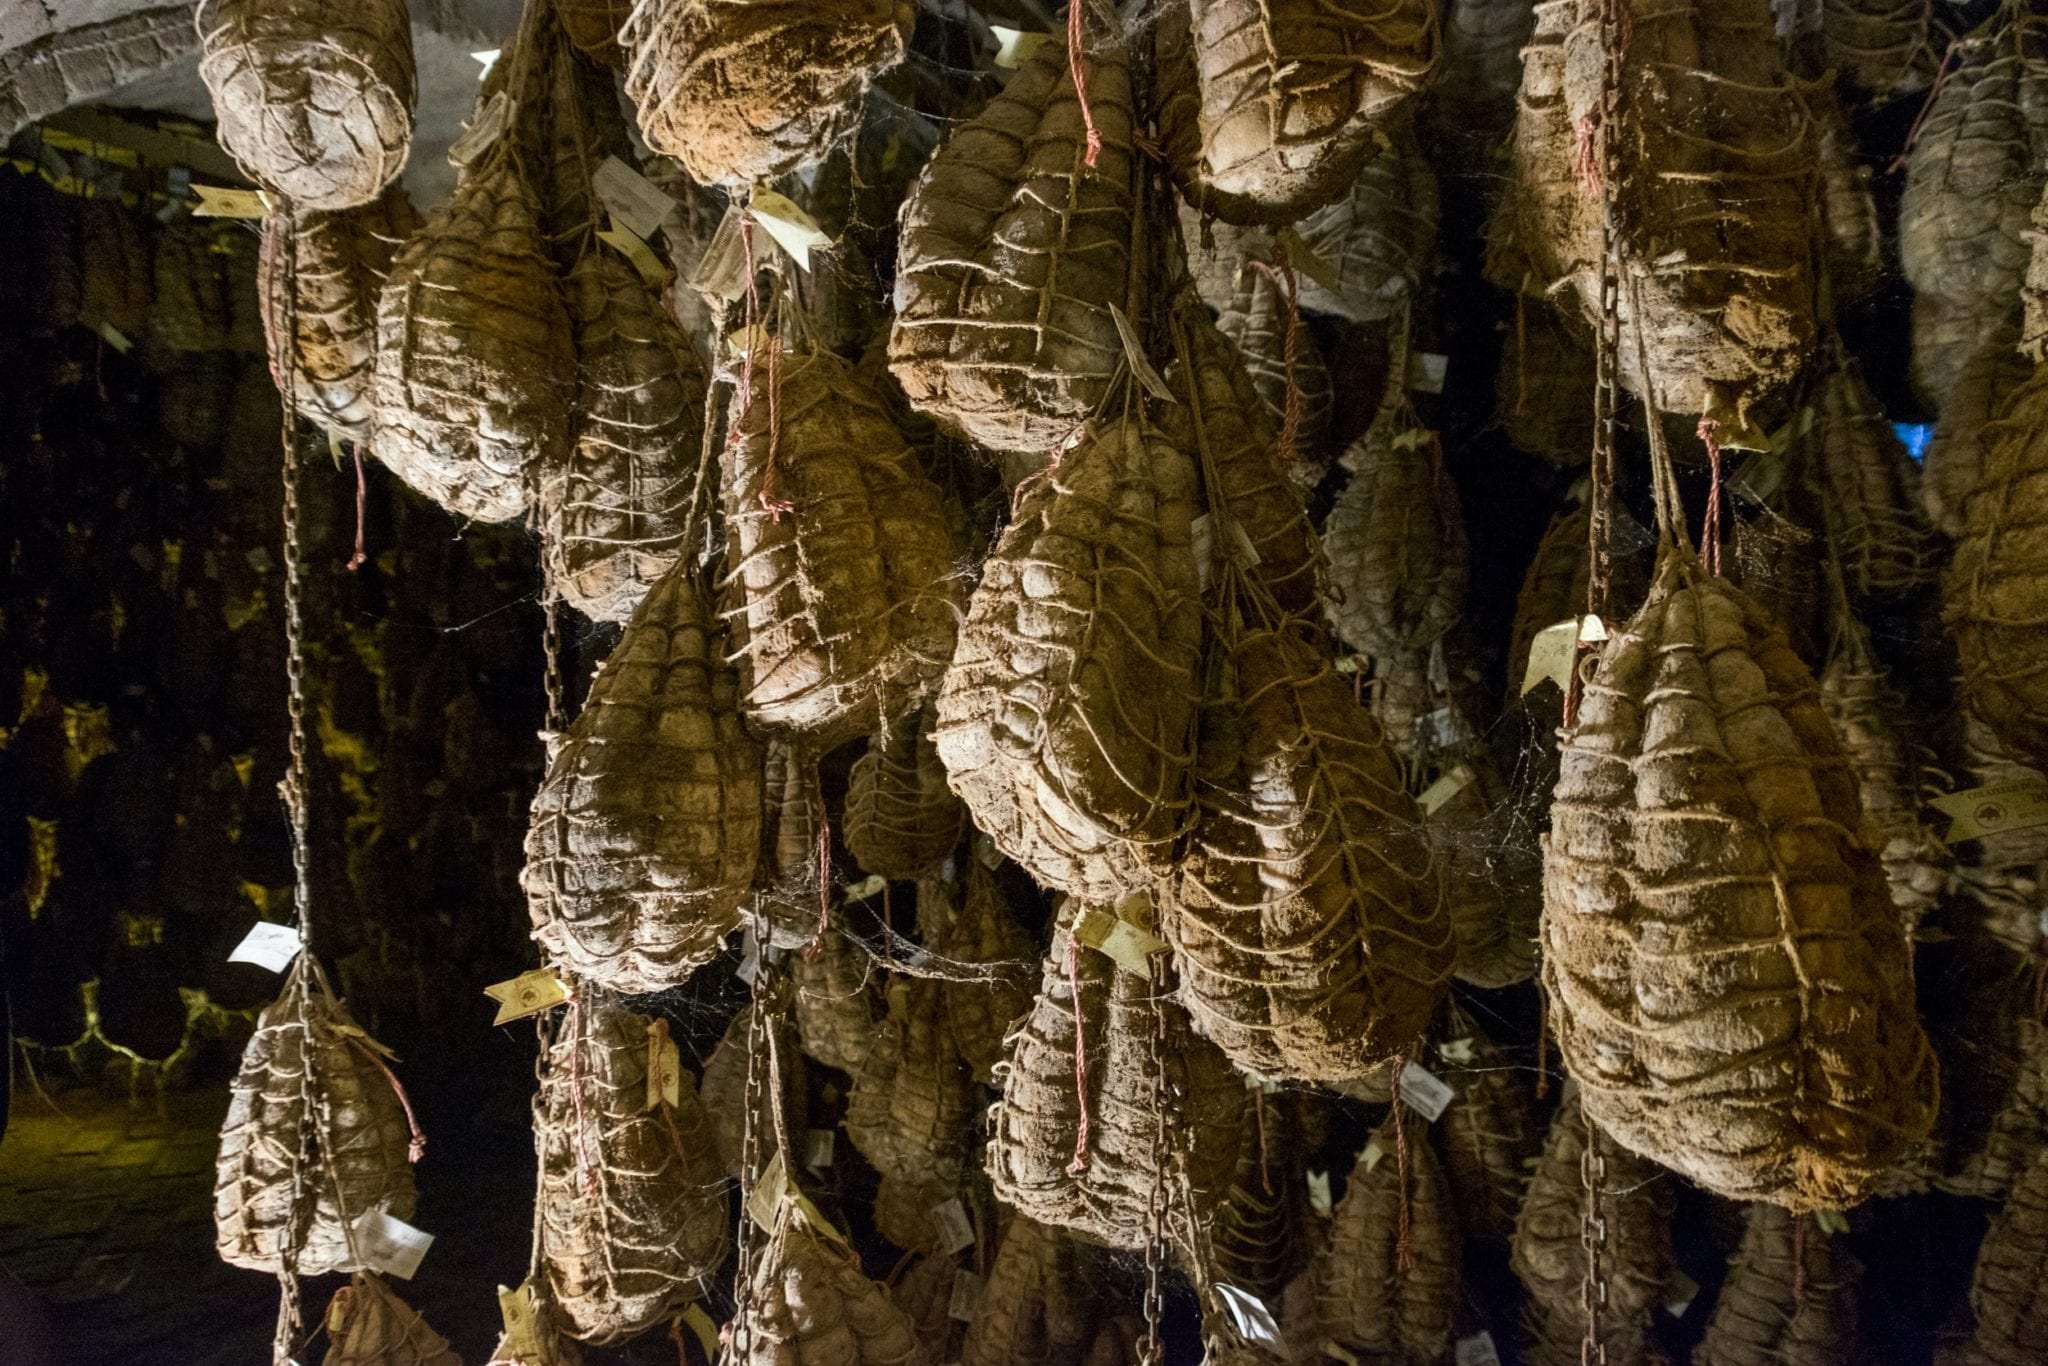 Culatello hams in a cellar, hanging from chains and connected with cobwebs.